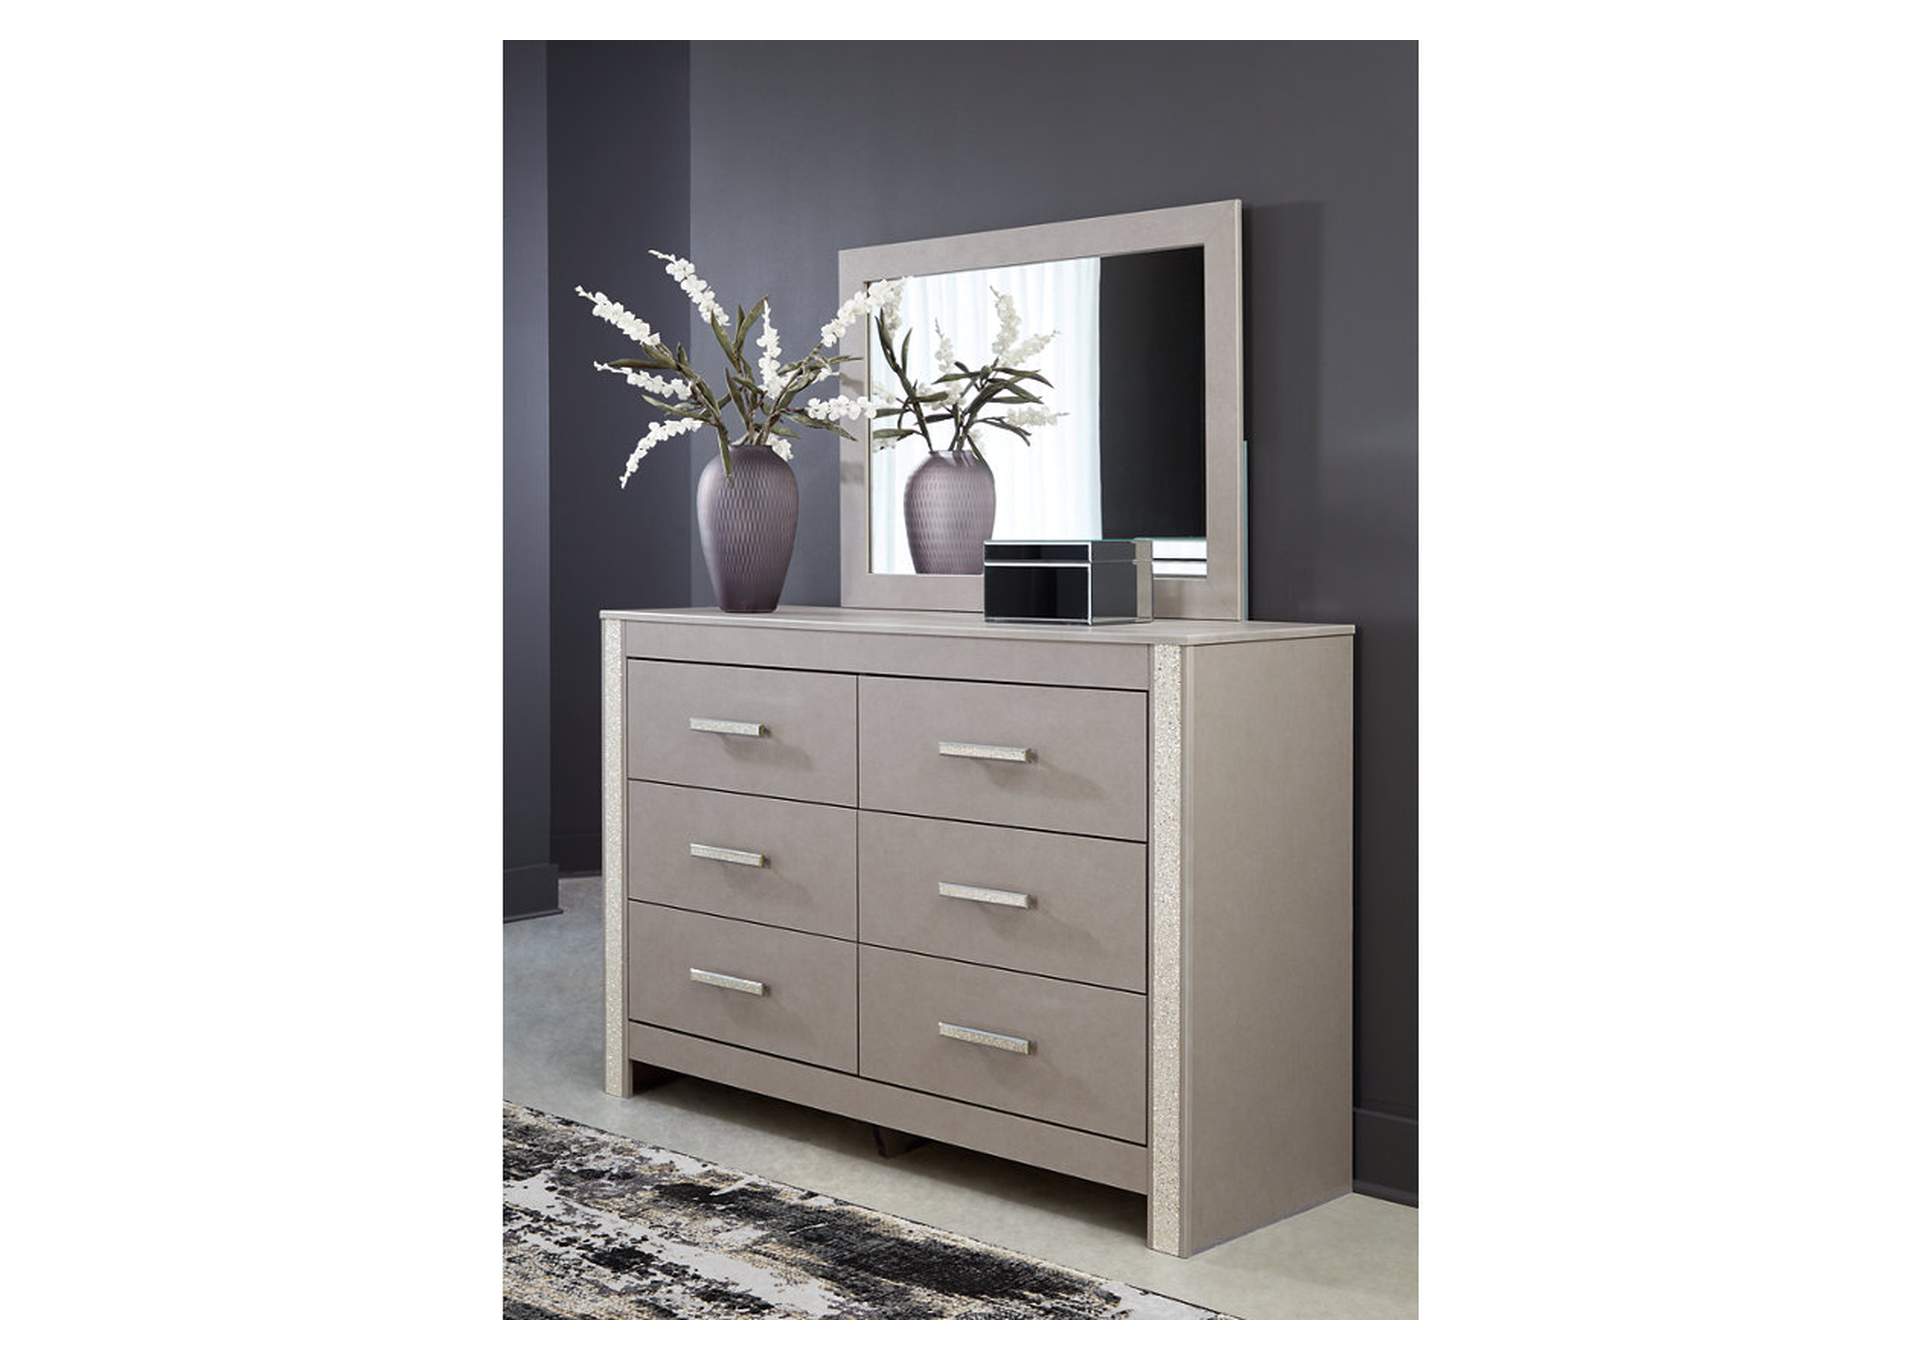 Surancha King Poster Bed with Mirrored Dresser and Chest,Signature Design By Ashley